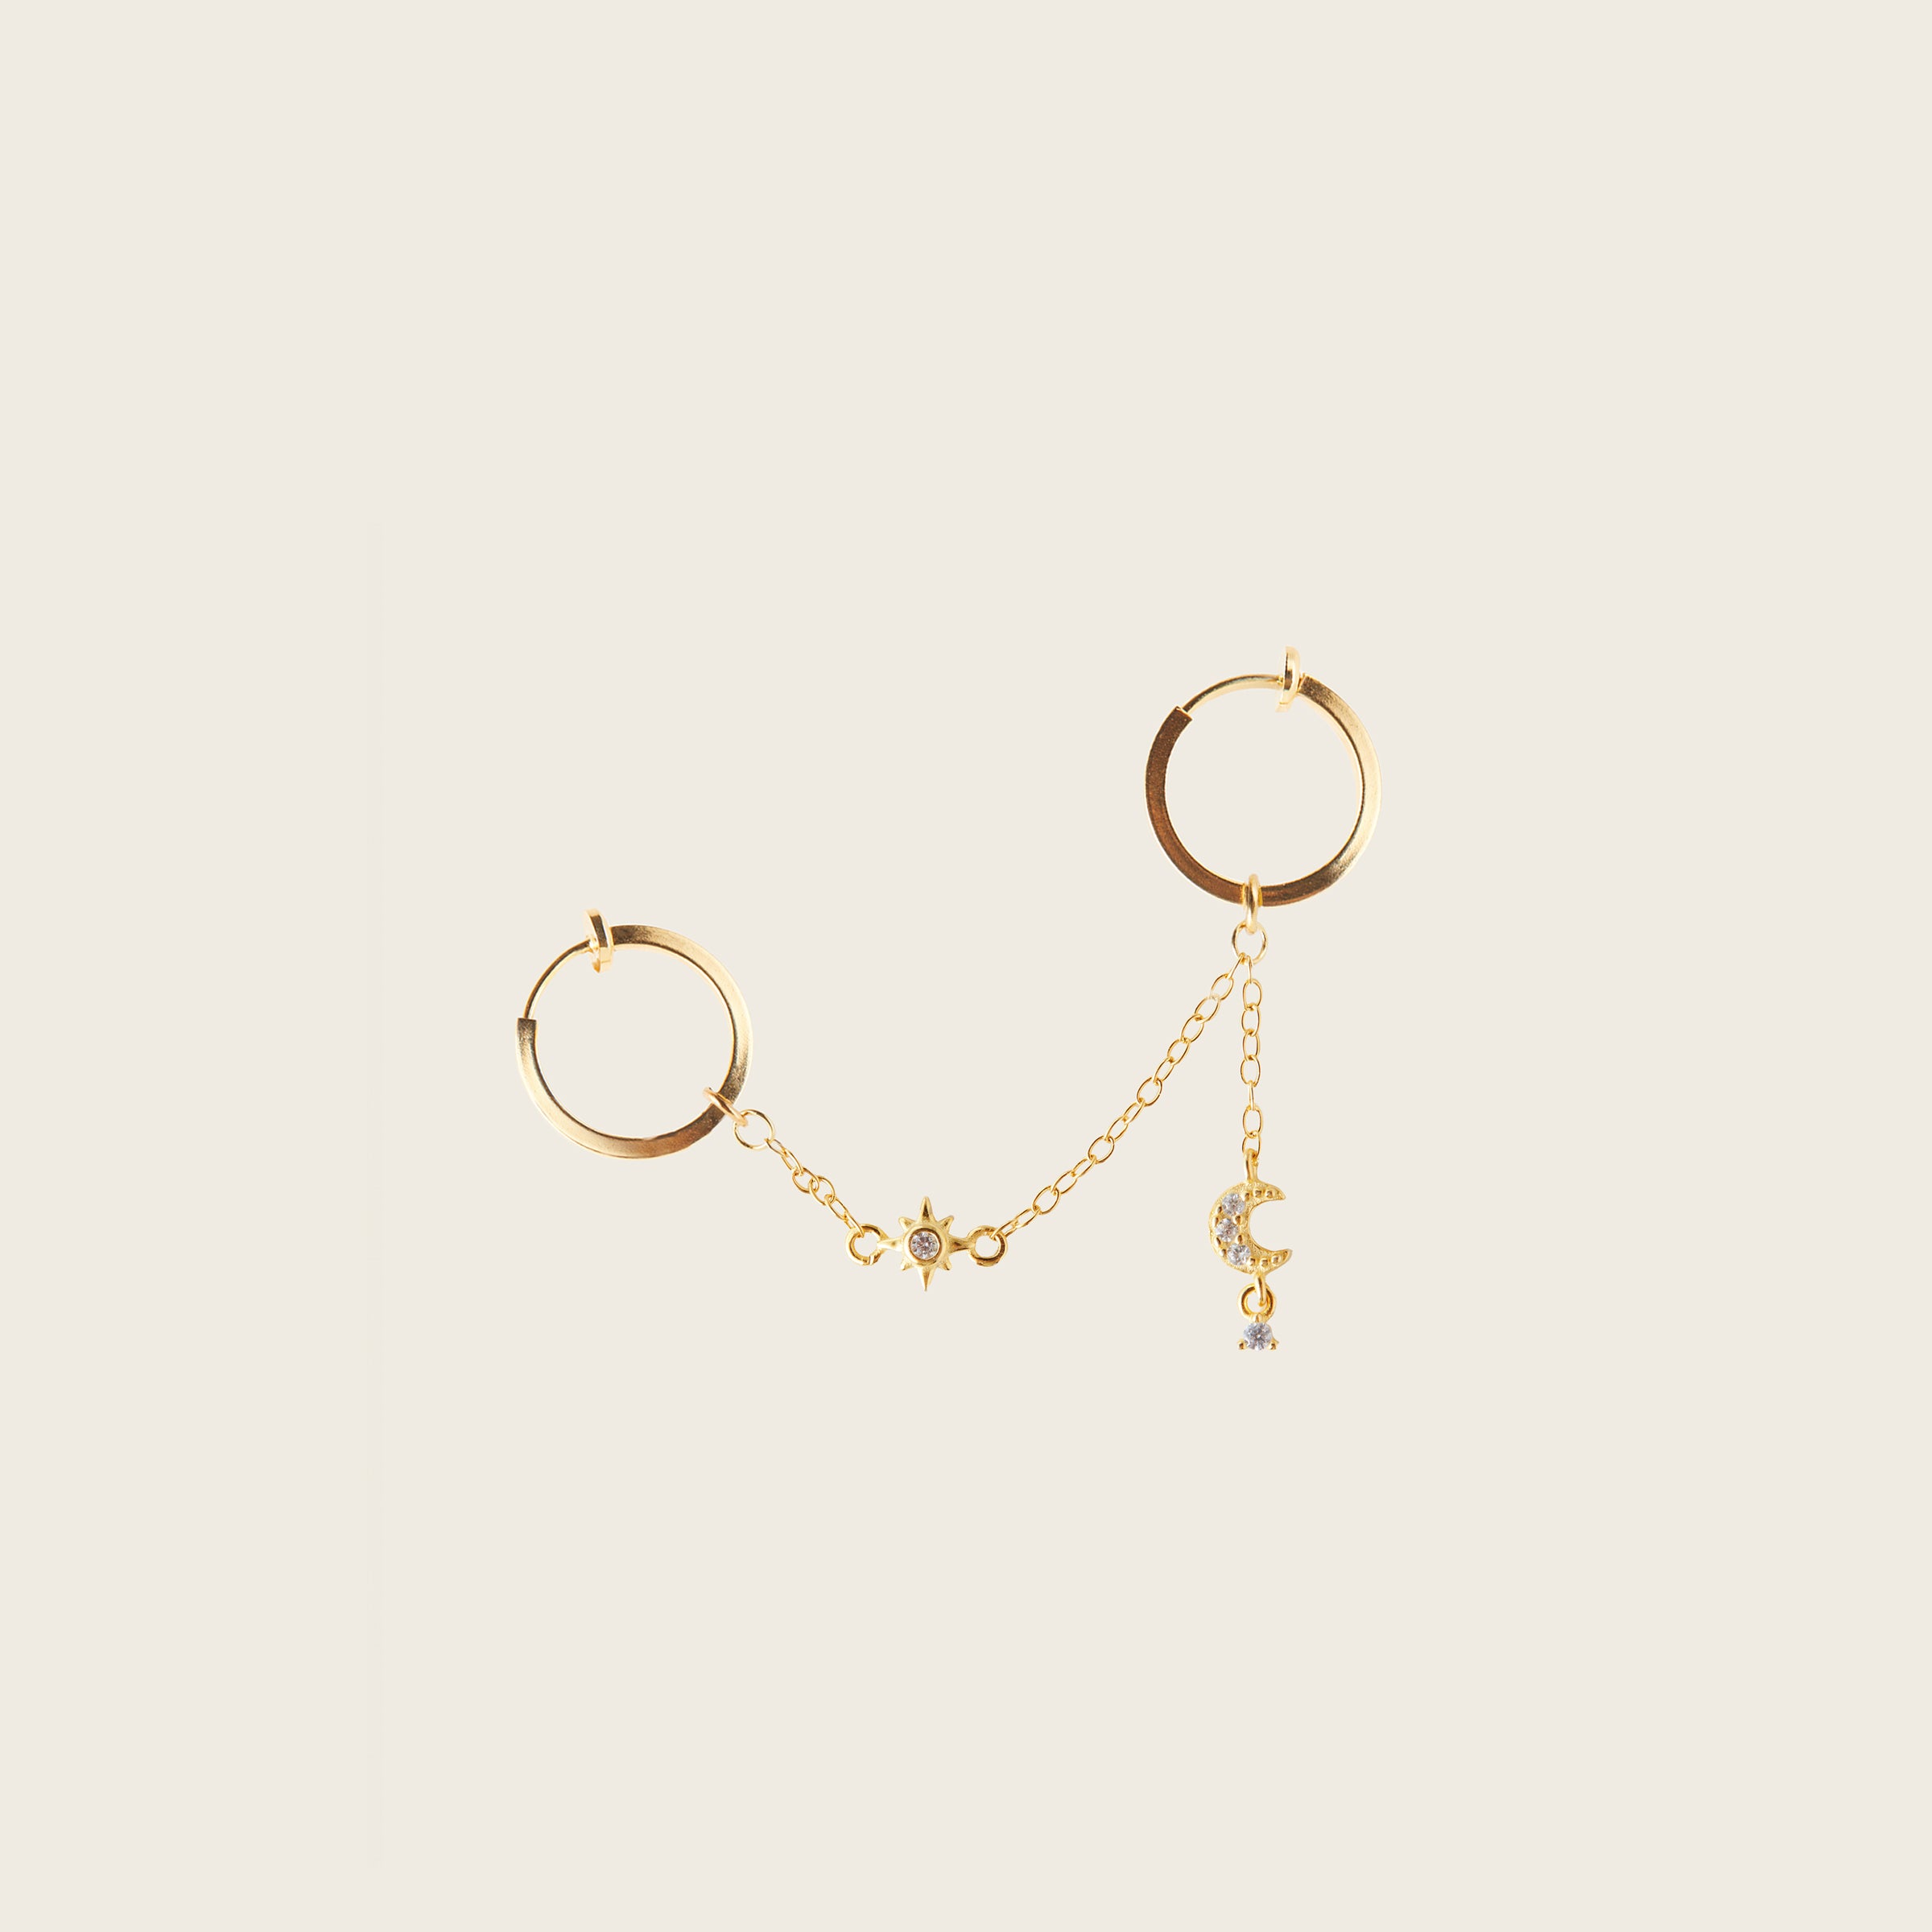 Image of the Single Celestial Hoop Chain are made with high-quality materials, including 18K gold plating over 925 Sterling Silver. These charms are both non-tarnish and water resistant. The perfect combination of style and durability.